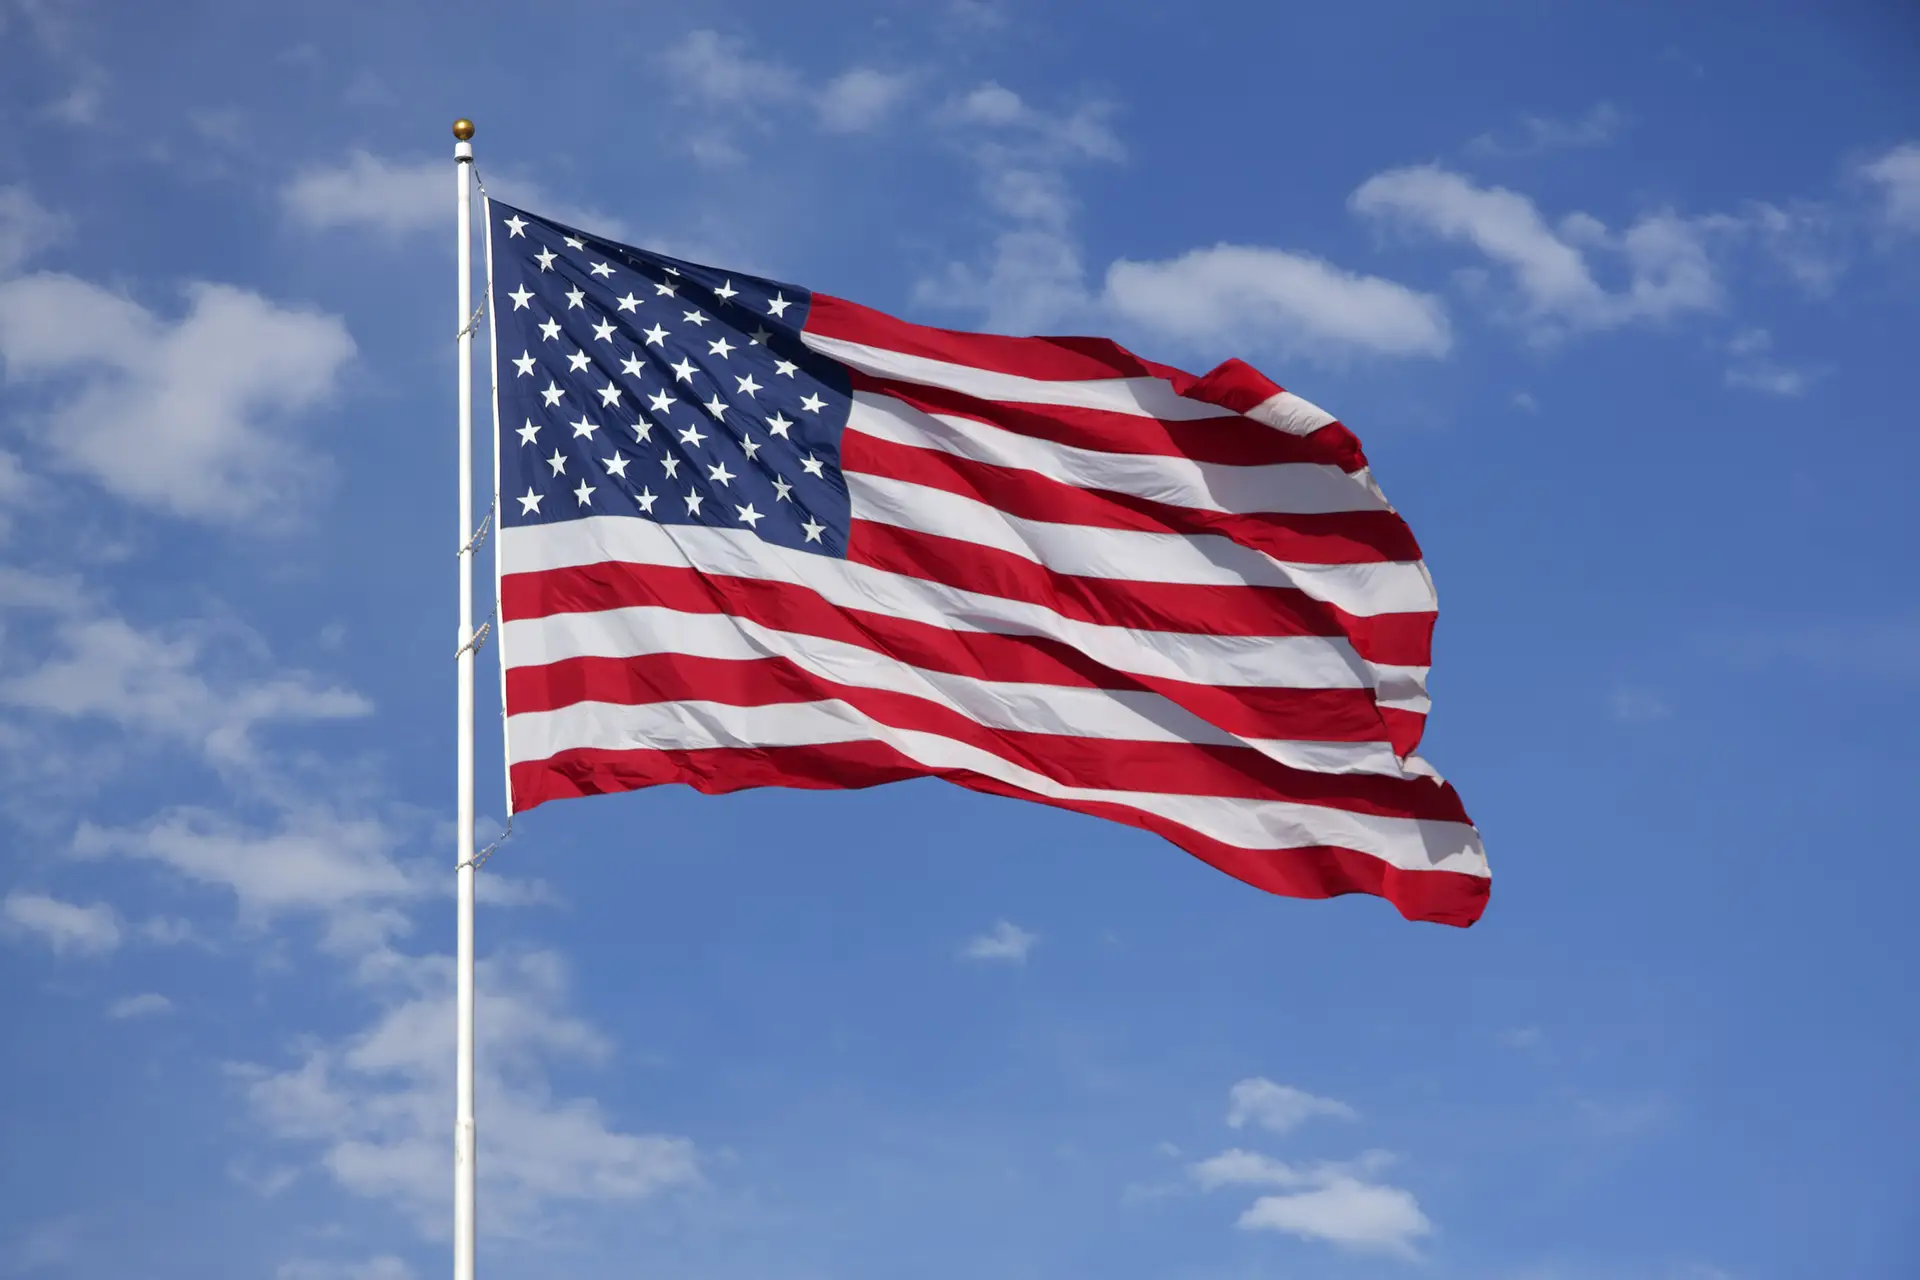 Full American Flag flying in the wind, with blue sky and clouds behind it